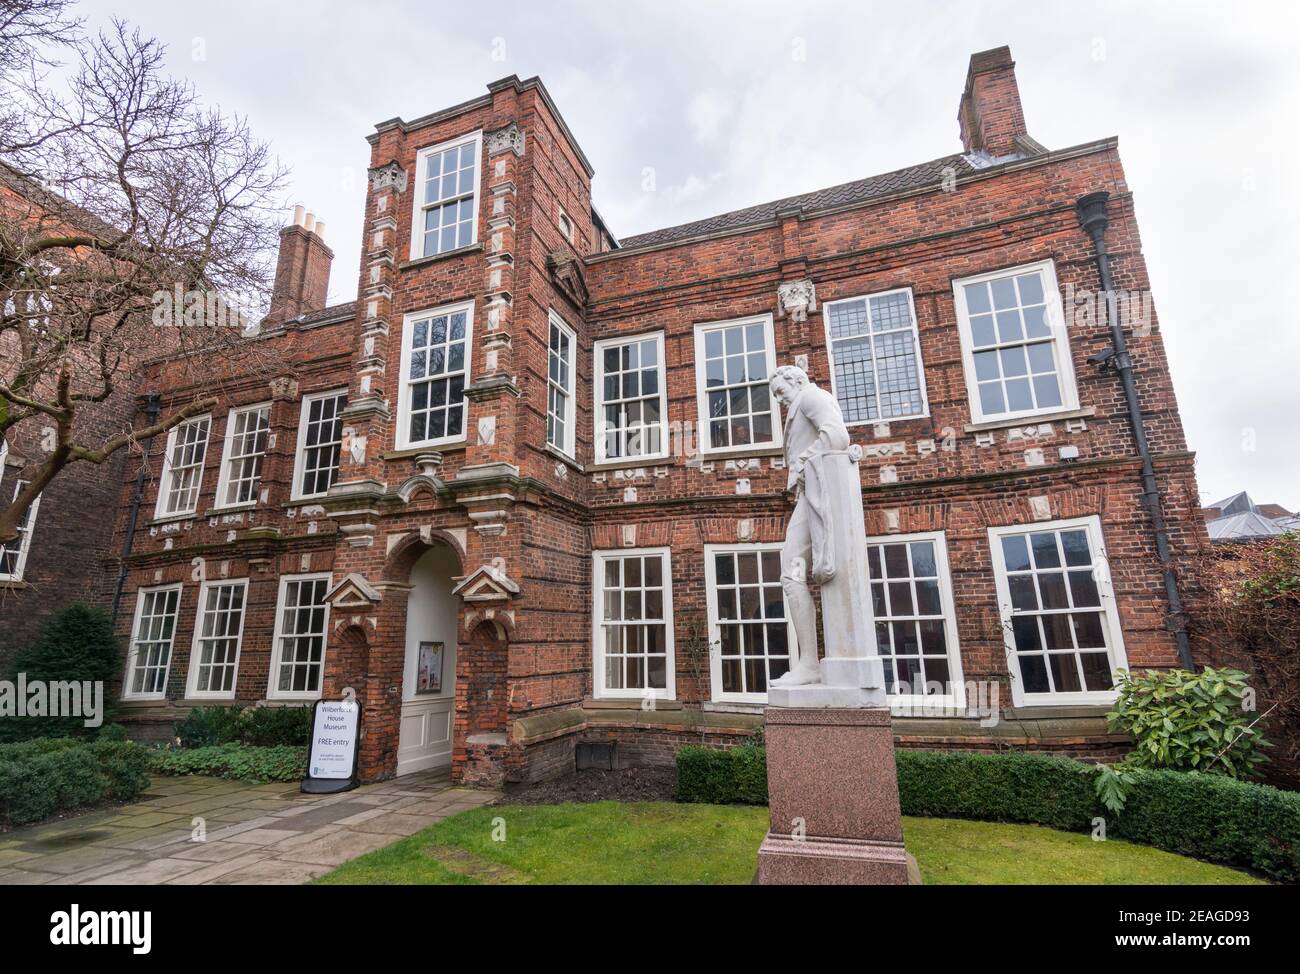 Wilberforce House (birthplace of William Wilberforce) now a museum. Front entrance featuring statue of William Wilberforce. Stock Photo